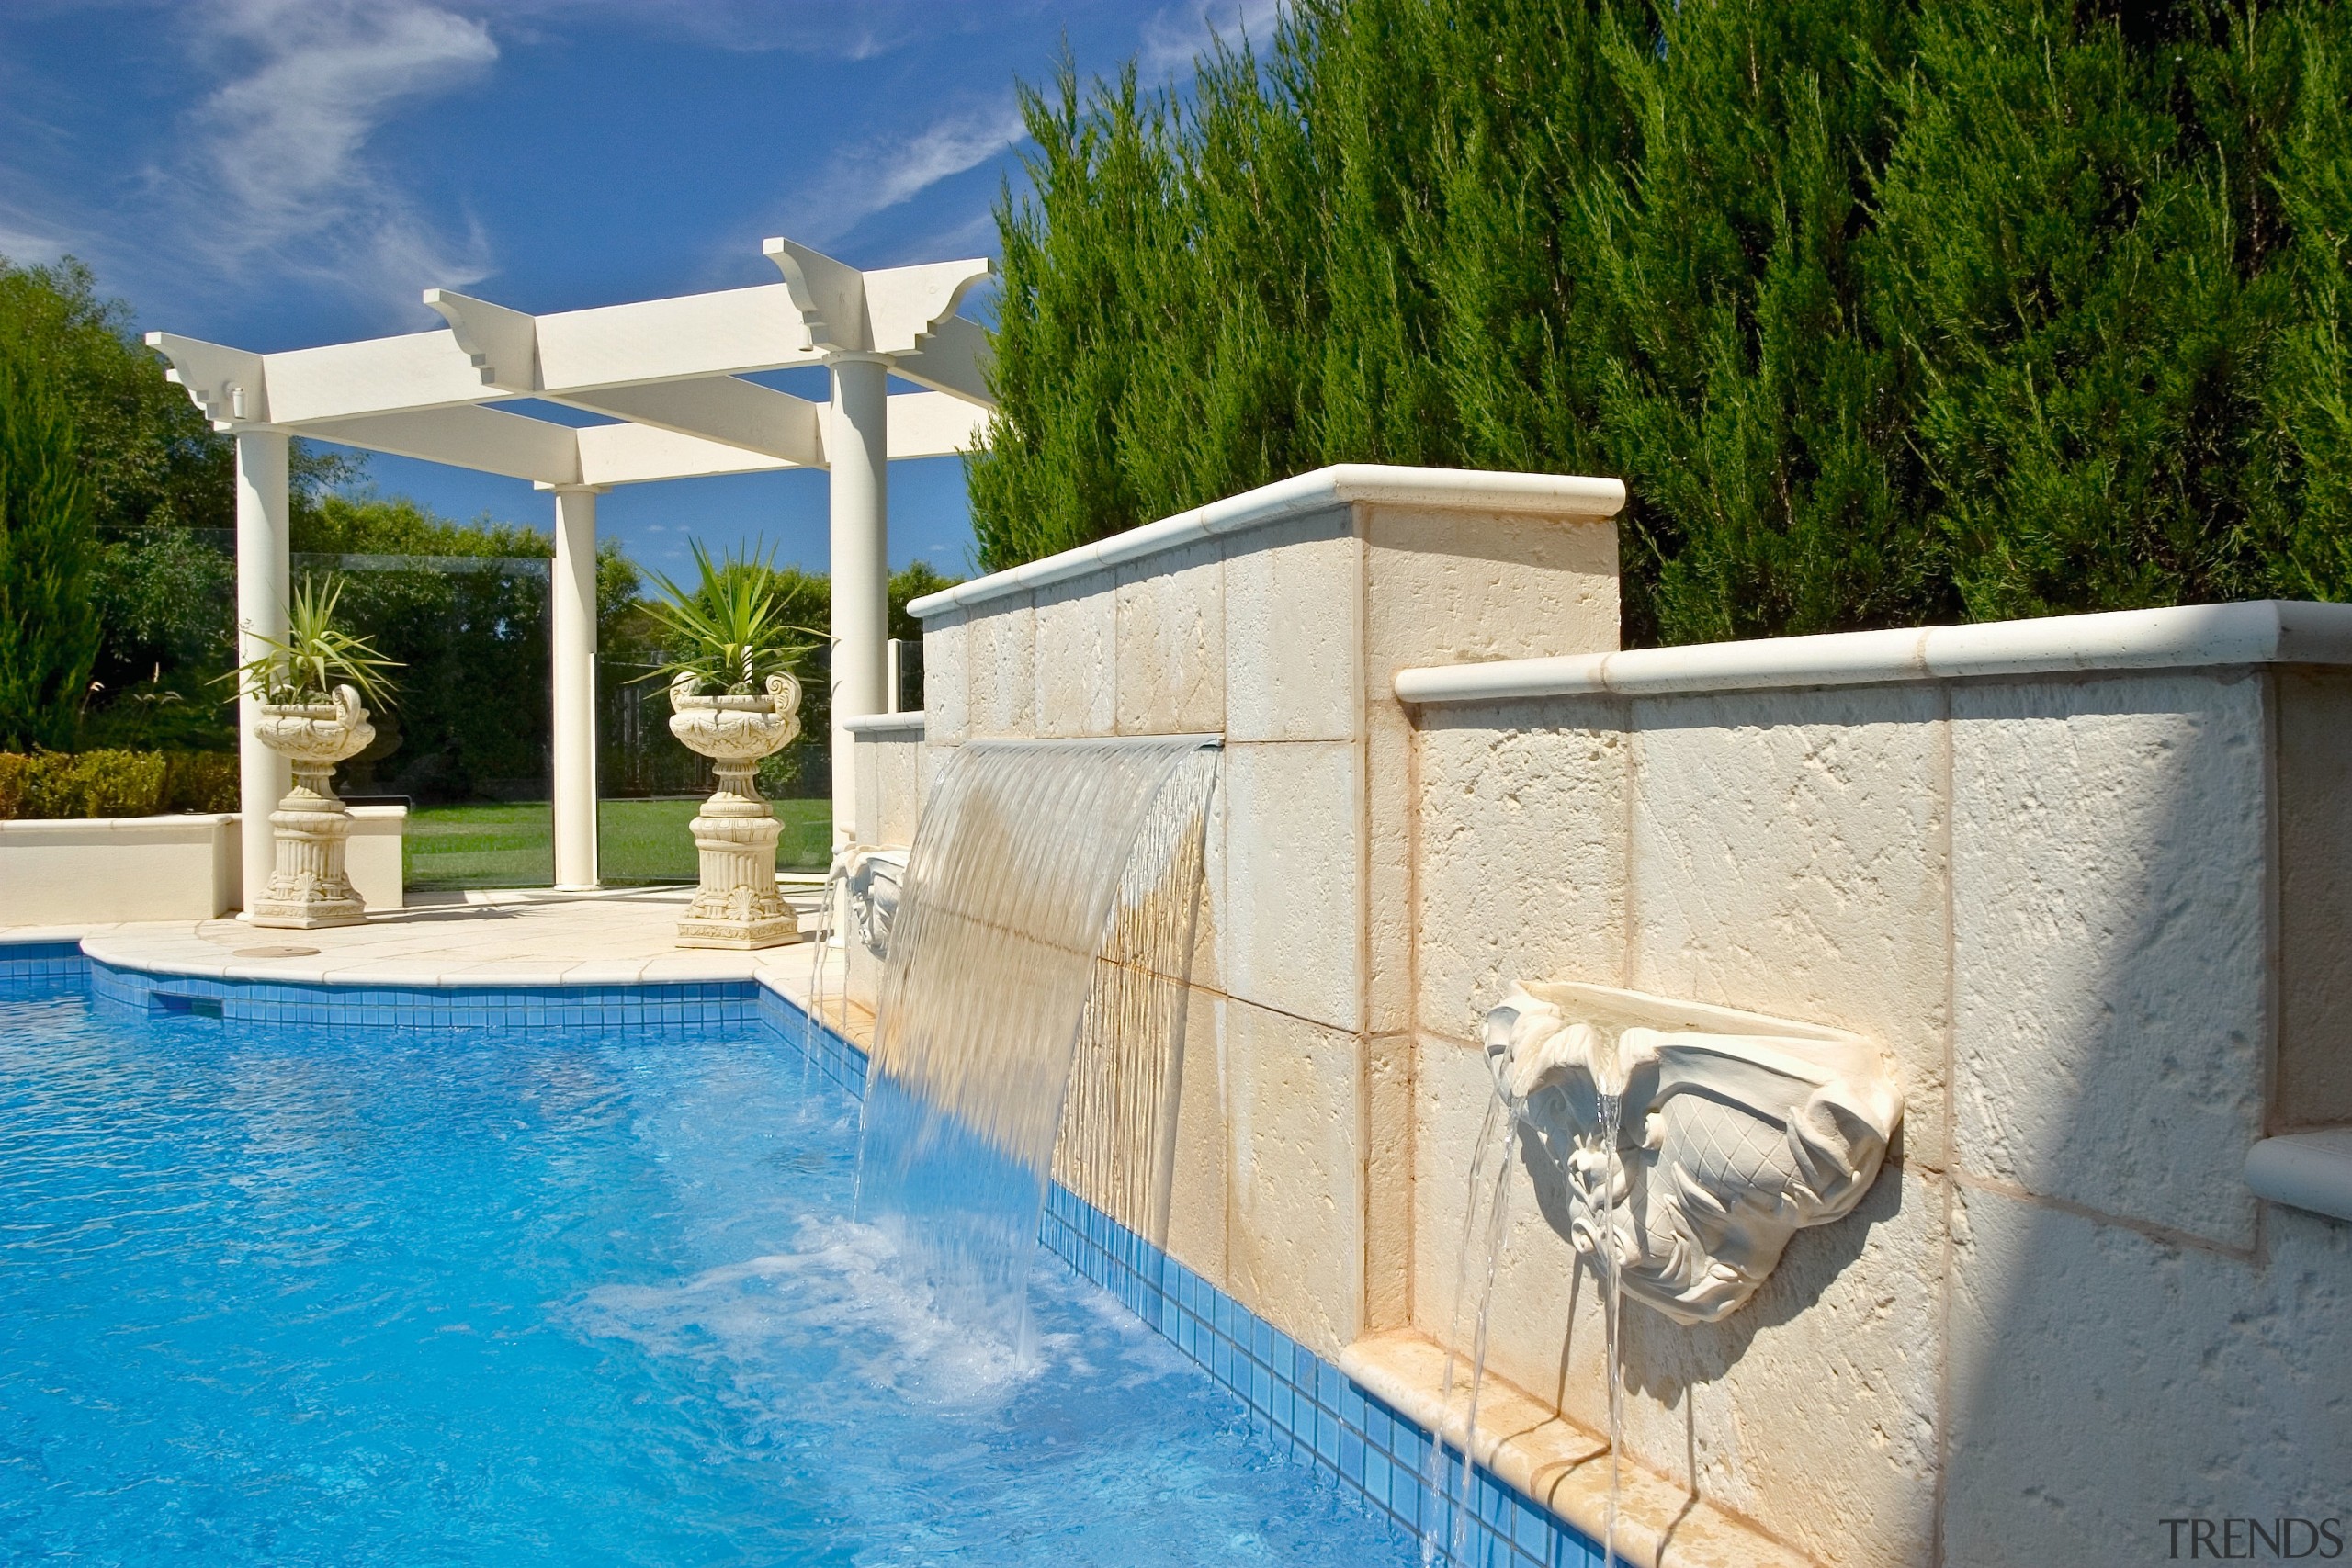 Close view of the pool &amp; surroundings - architecture, estate, house, leisure, property, real estate, swimming pool, villa, water